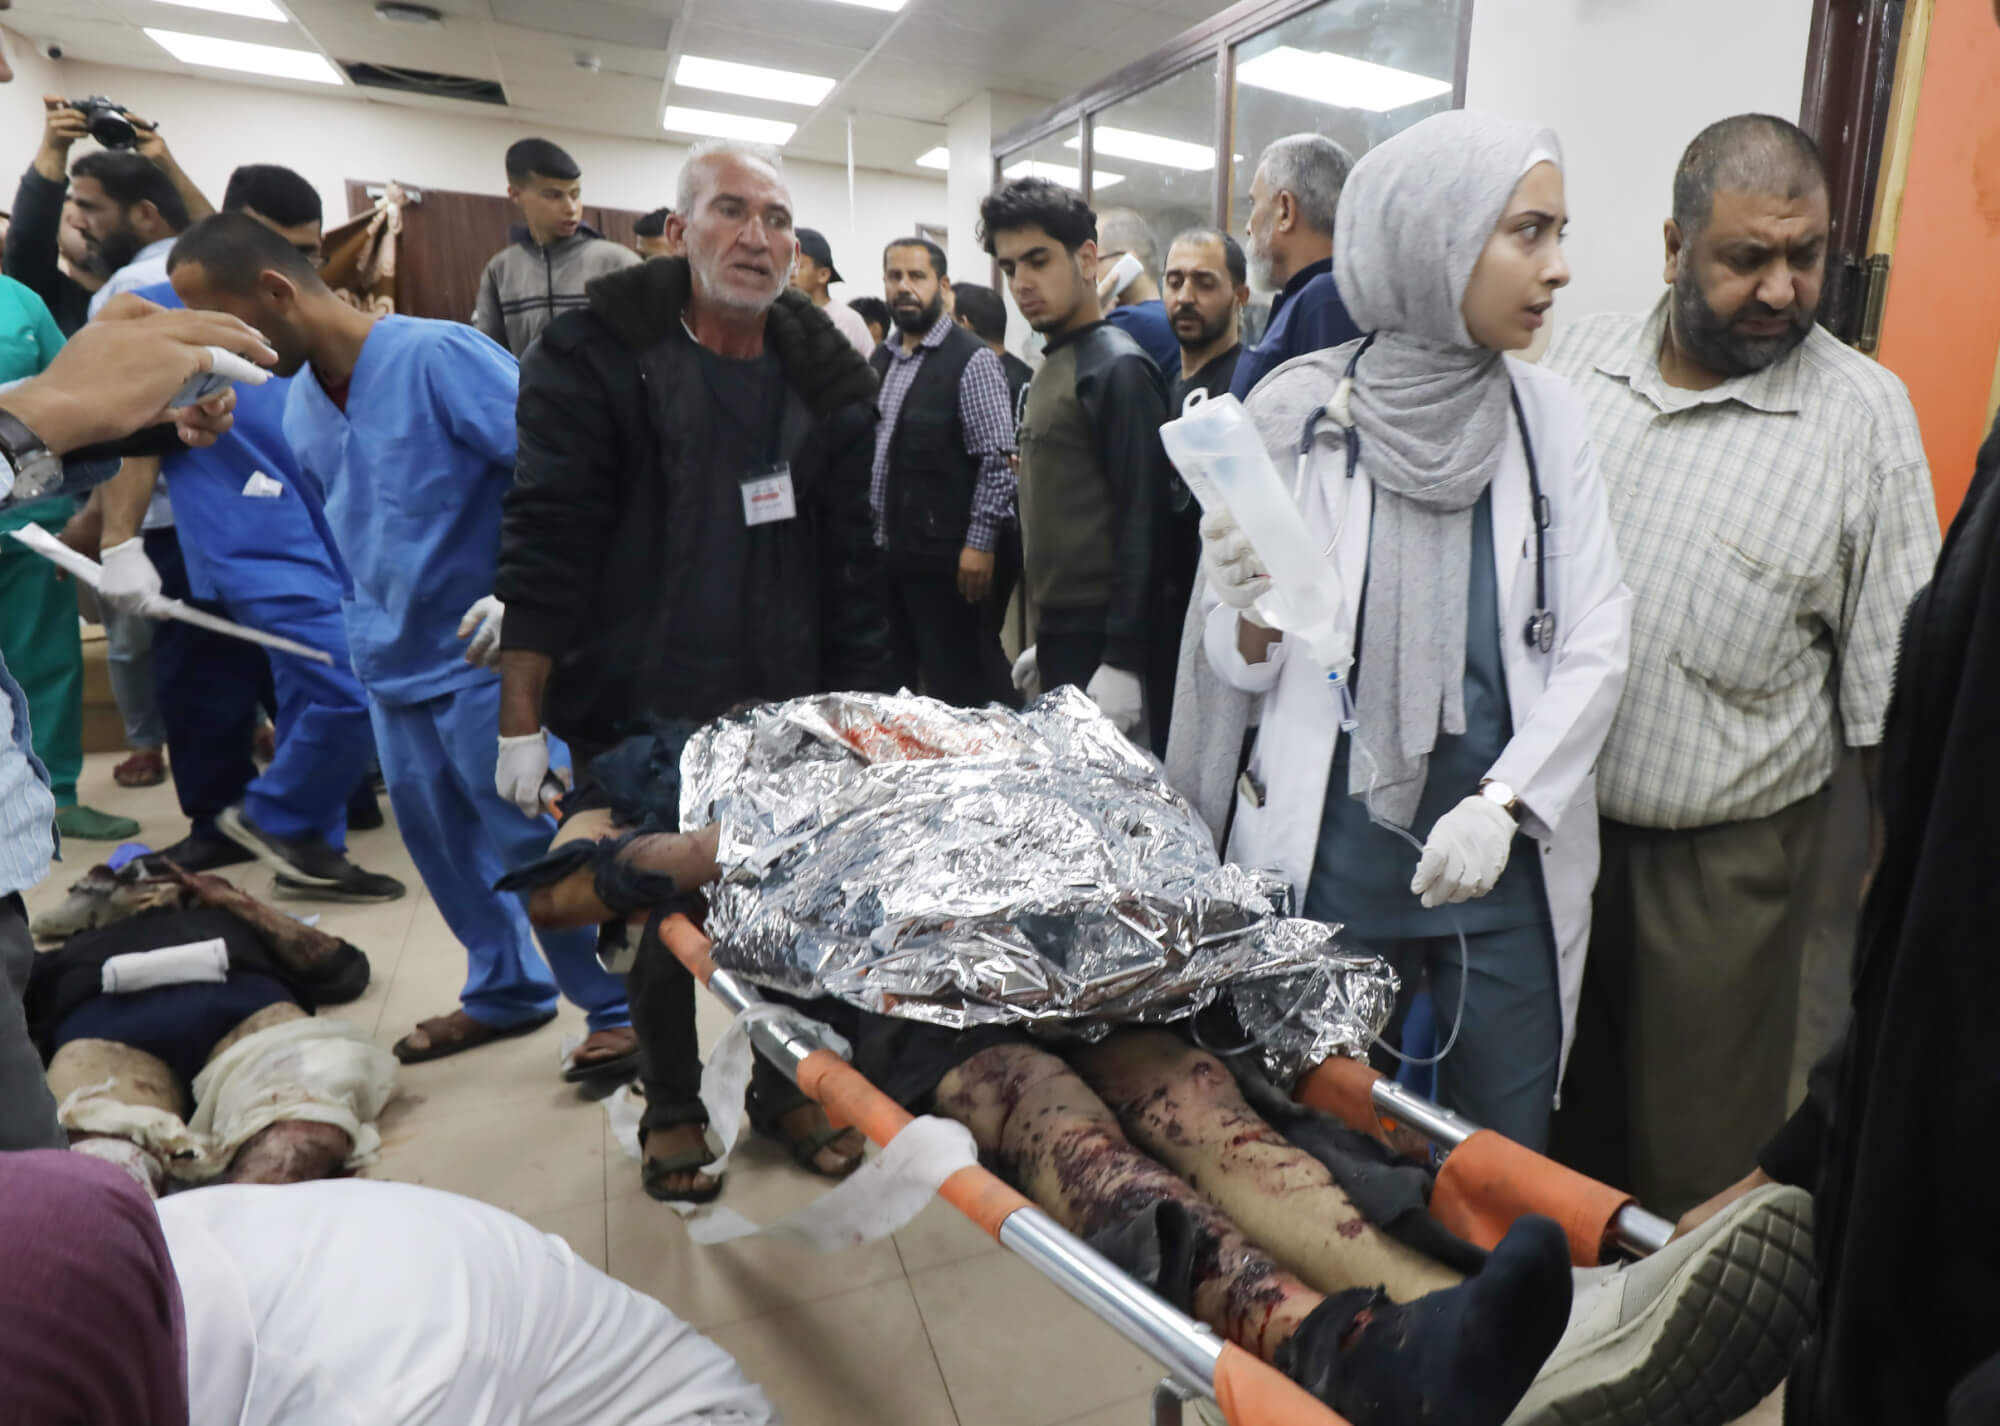 Gaza’s collapsing health system is one of the goals of Israel’s genocide – breaking news